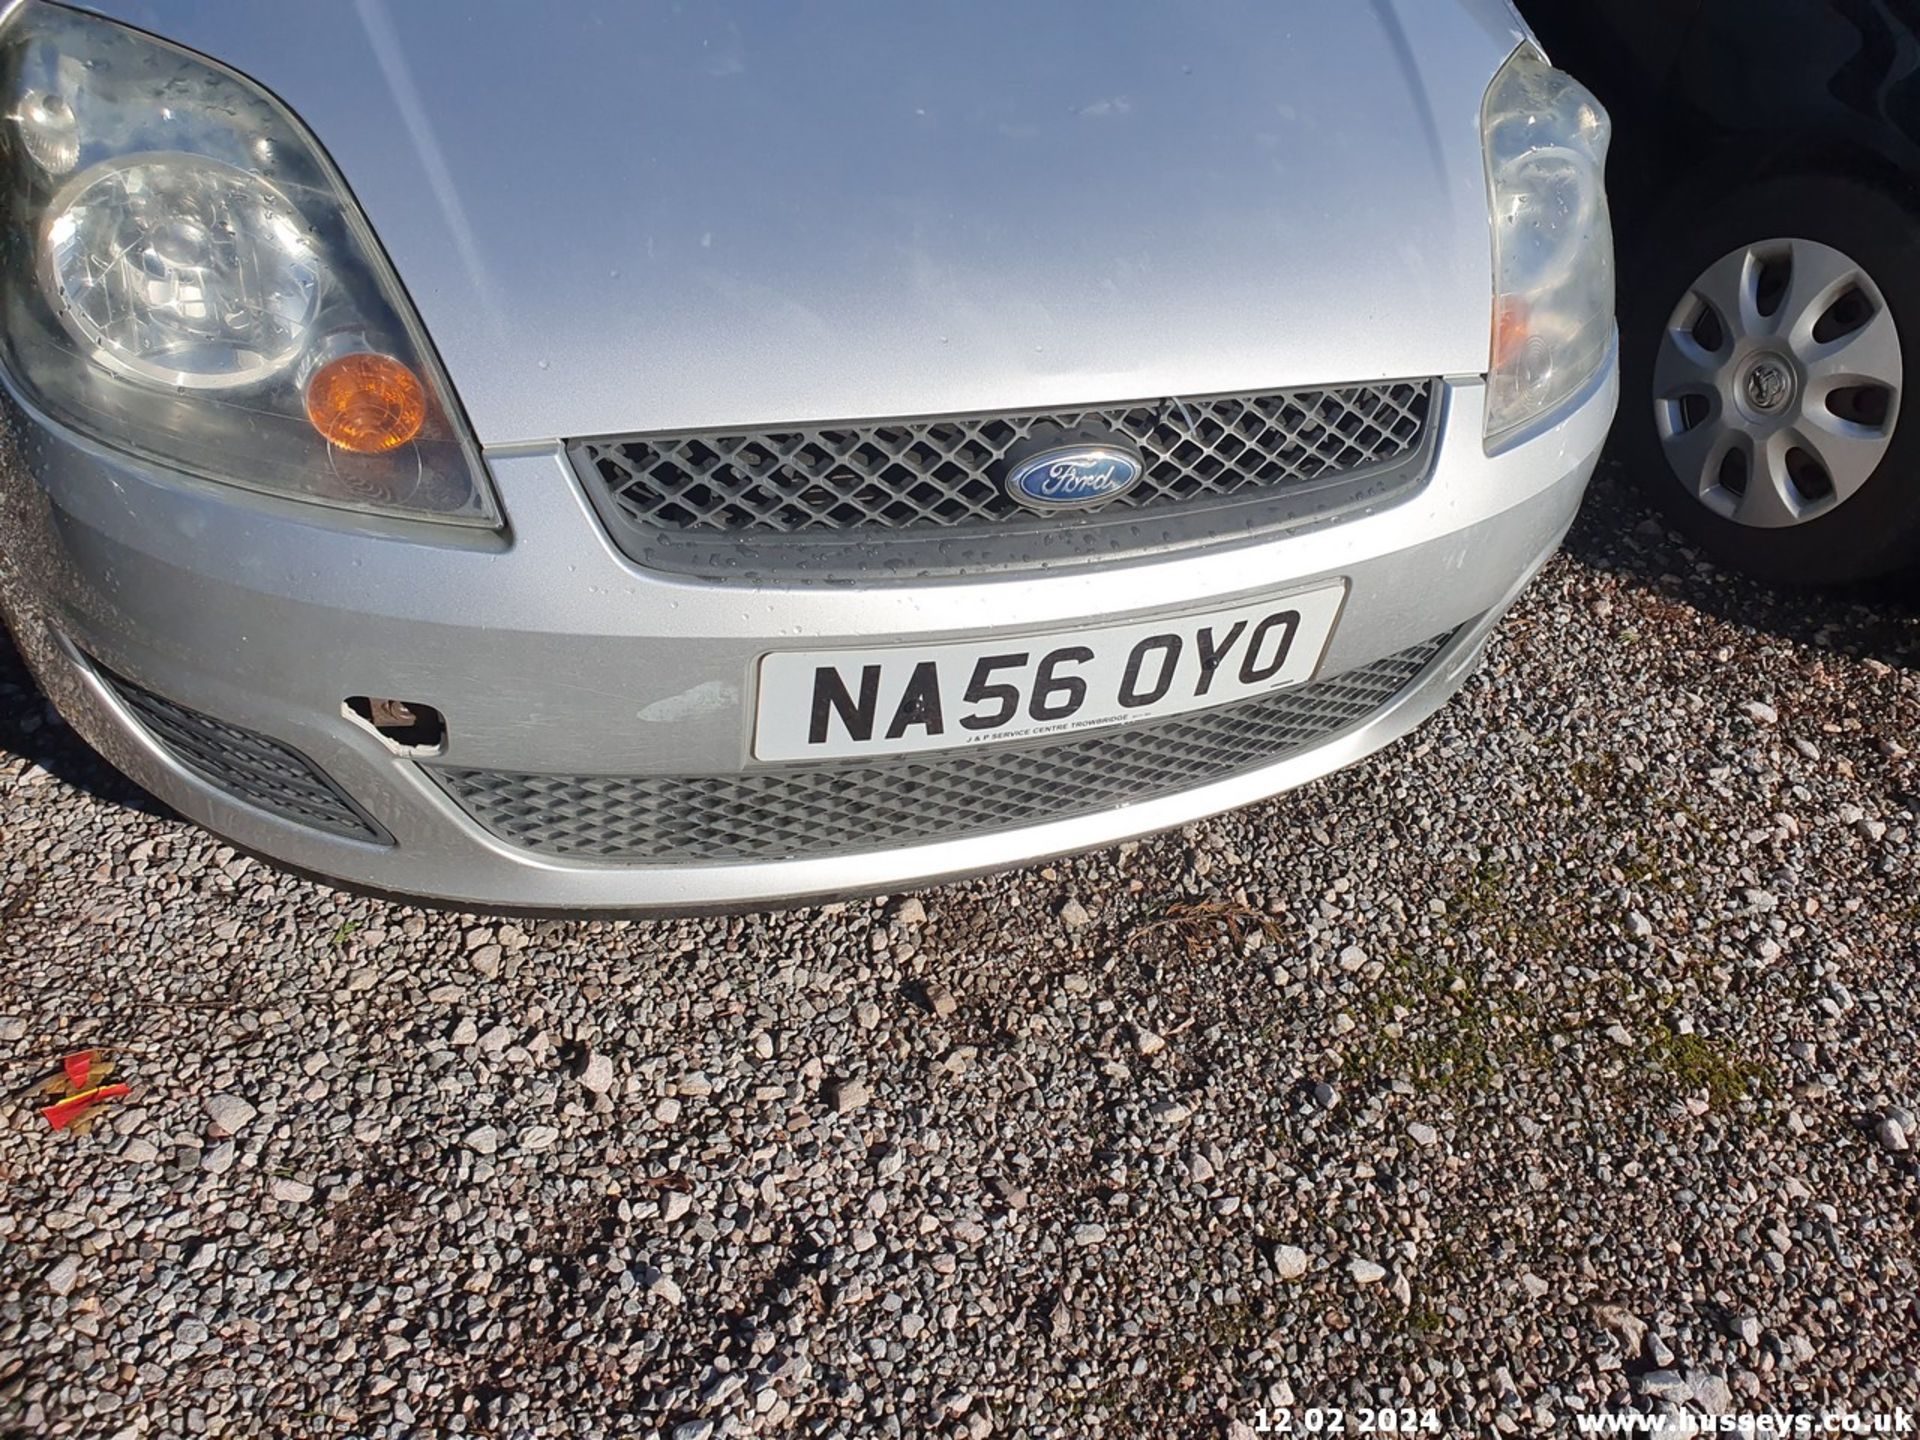 06/56 FORD FIESTA STYLE TDCI - 1399cc 5dr Hatchback (Silver) - Image 9 of 39